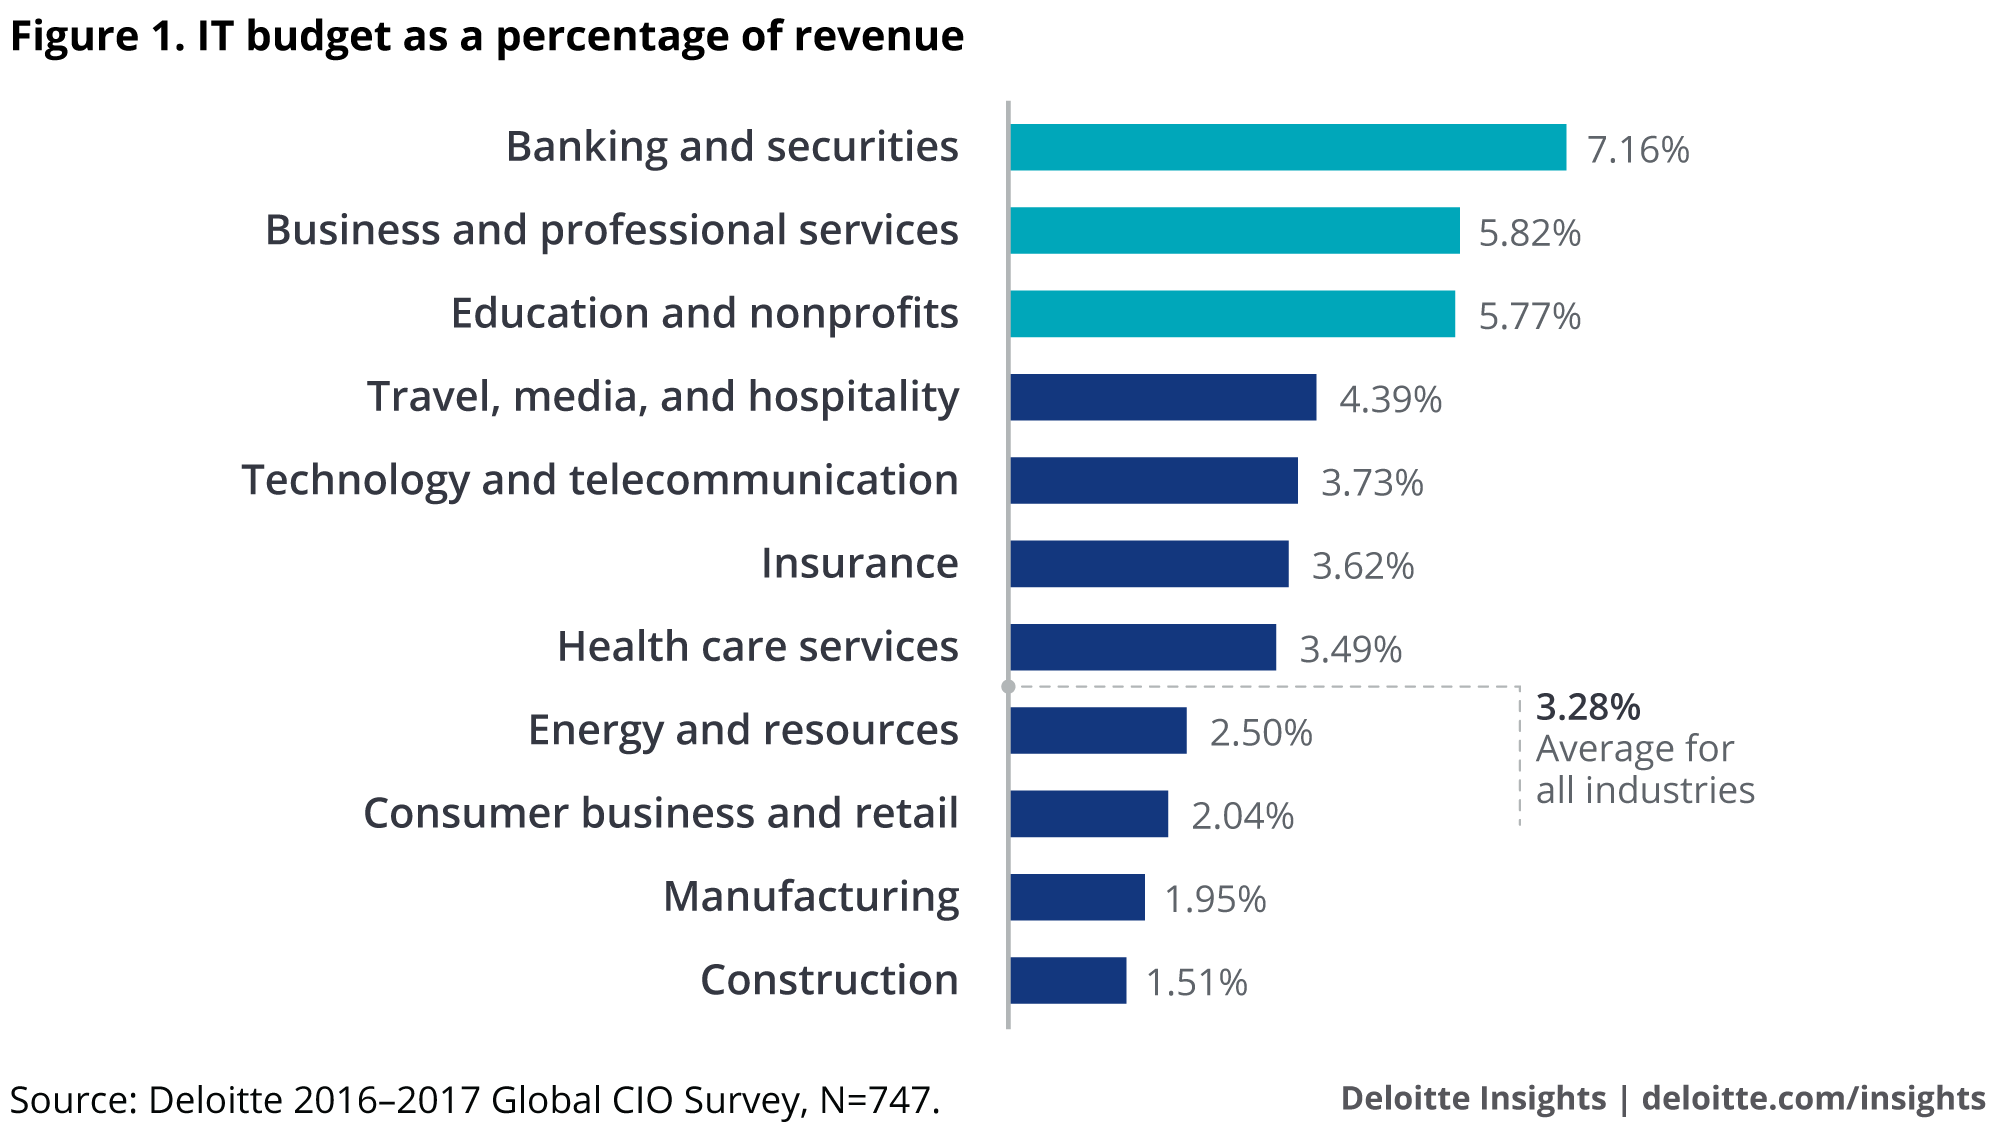 IT budget as a percentage of revenue